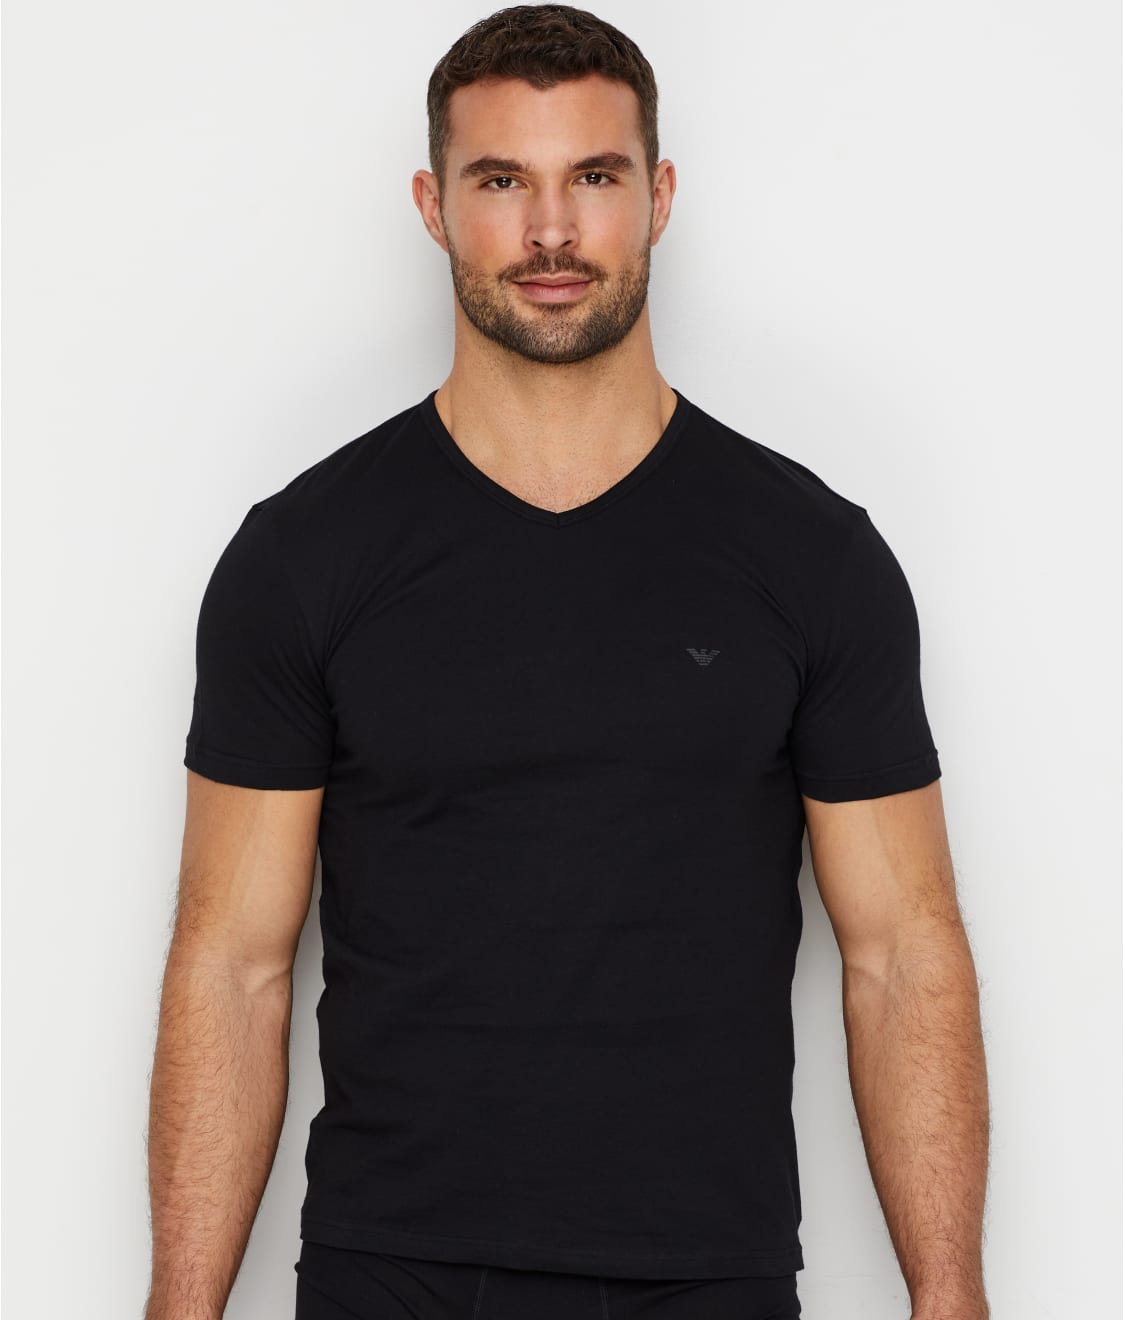 Buy > armani 3 pack t shirt > in stock